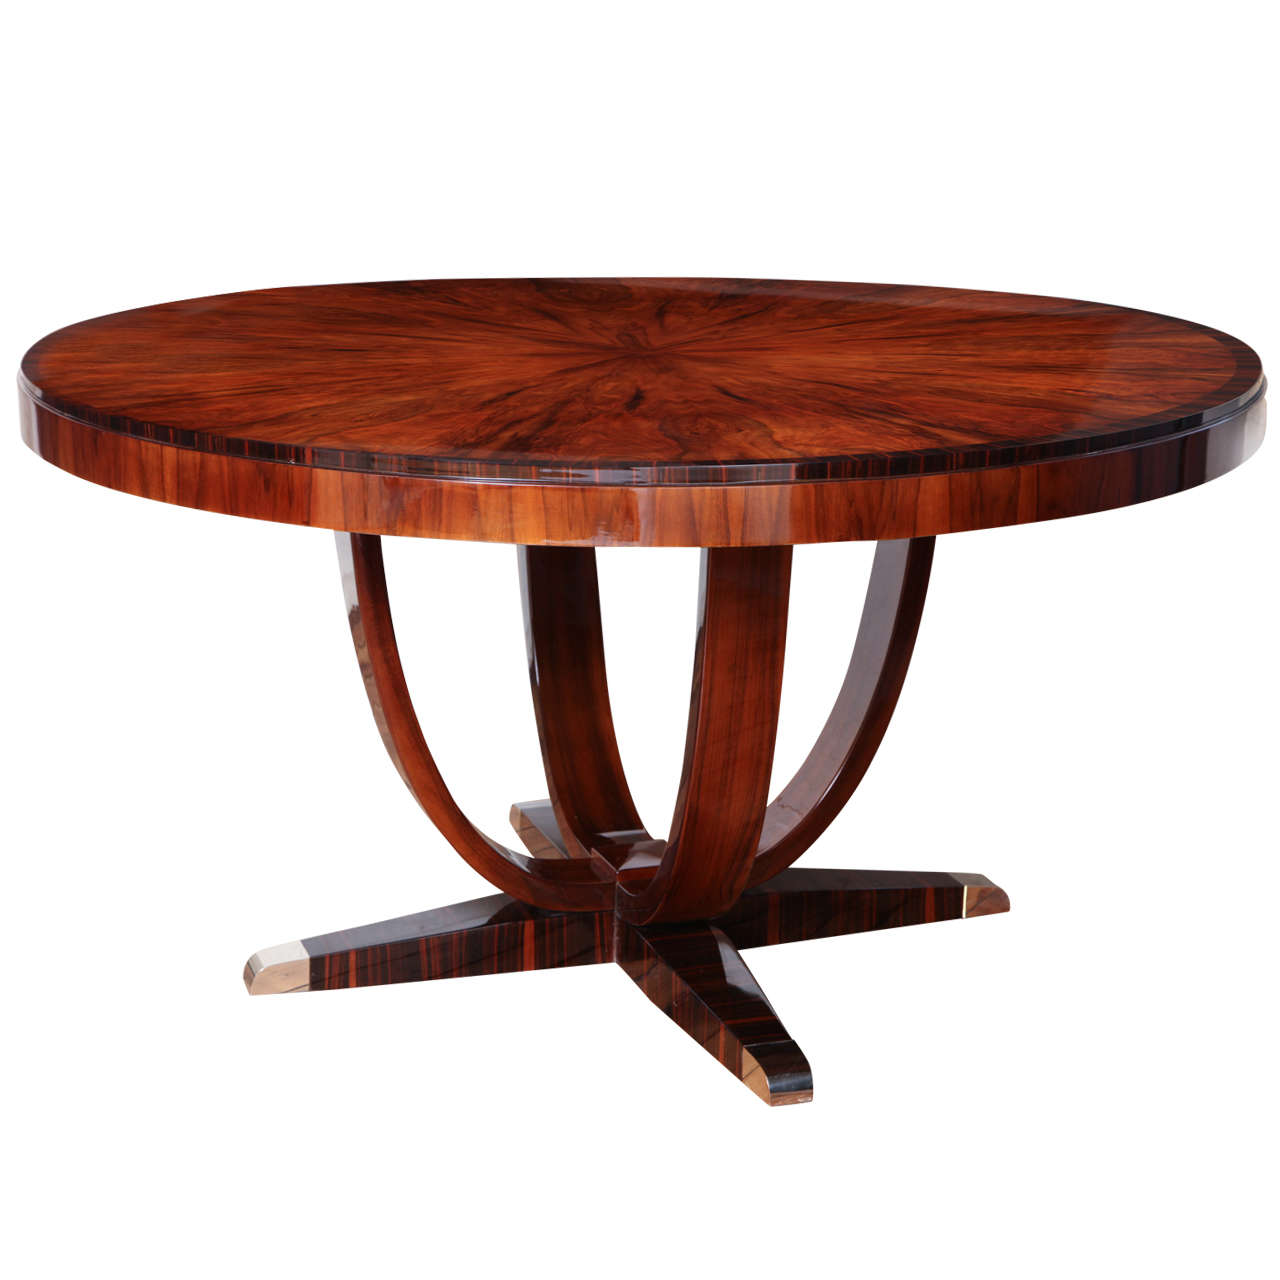 Fabulous Art Deco Round Dining Table For Sale